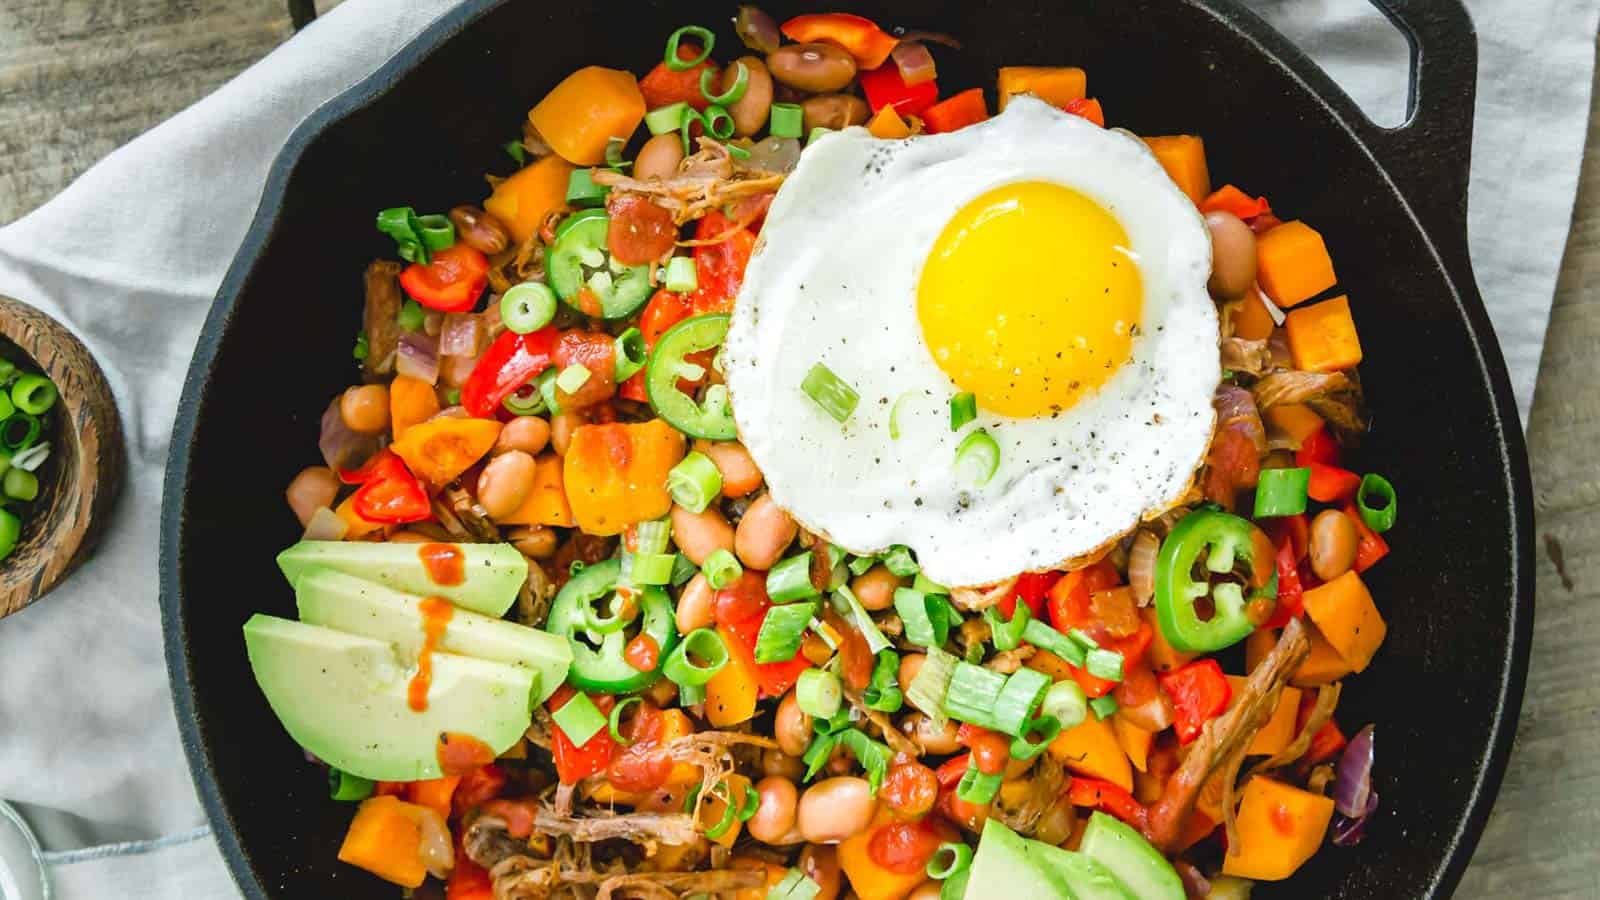 Brisket hash with a fried egg in a cast iron skillet.